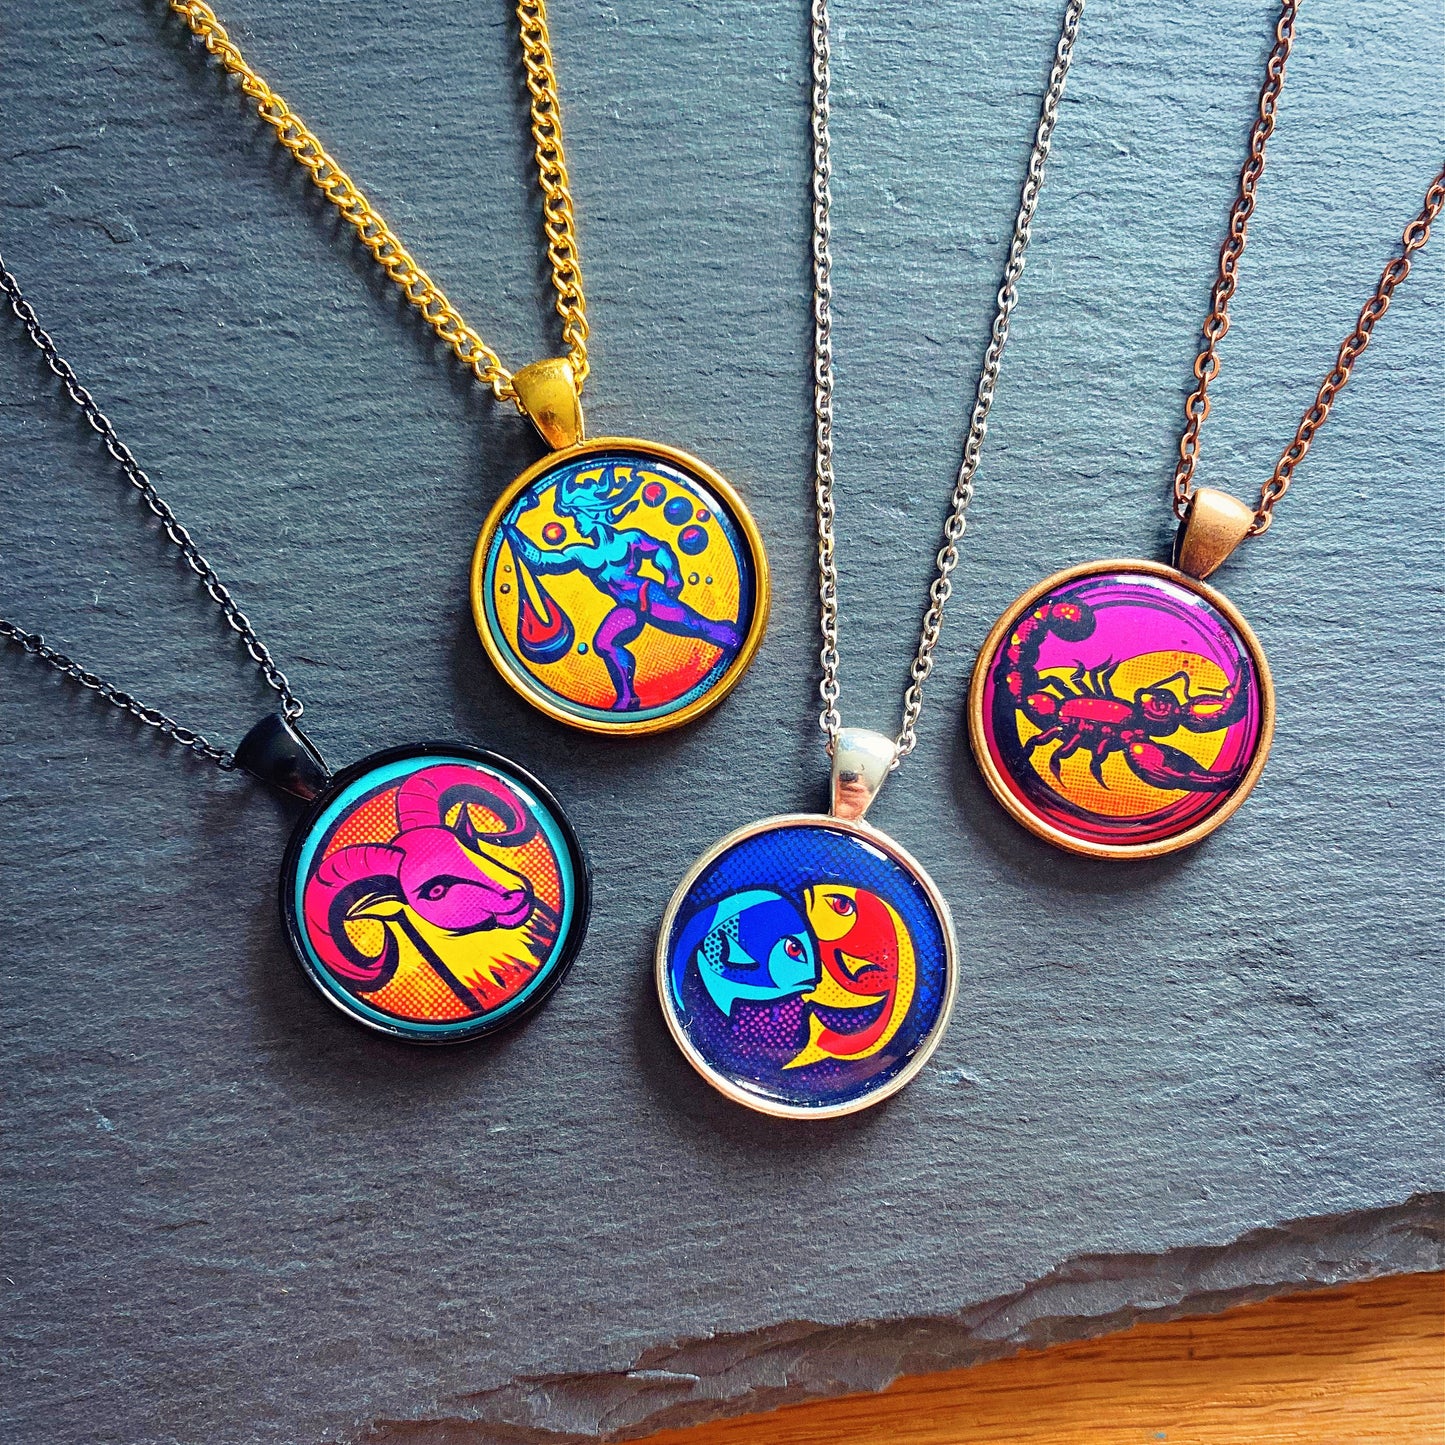 Pisces Earrings. Horoscope Symbol Necklace. Zodiac Sign Jewellery. Astrology Earrings. Pop Art Colourful Pendant. Star Sign Gift. Fish.